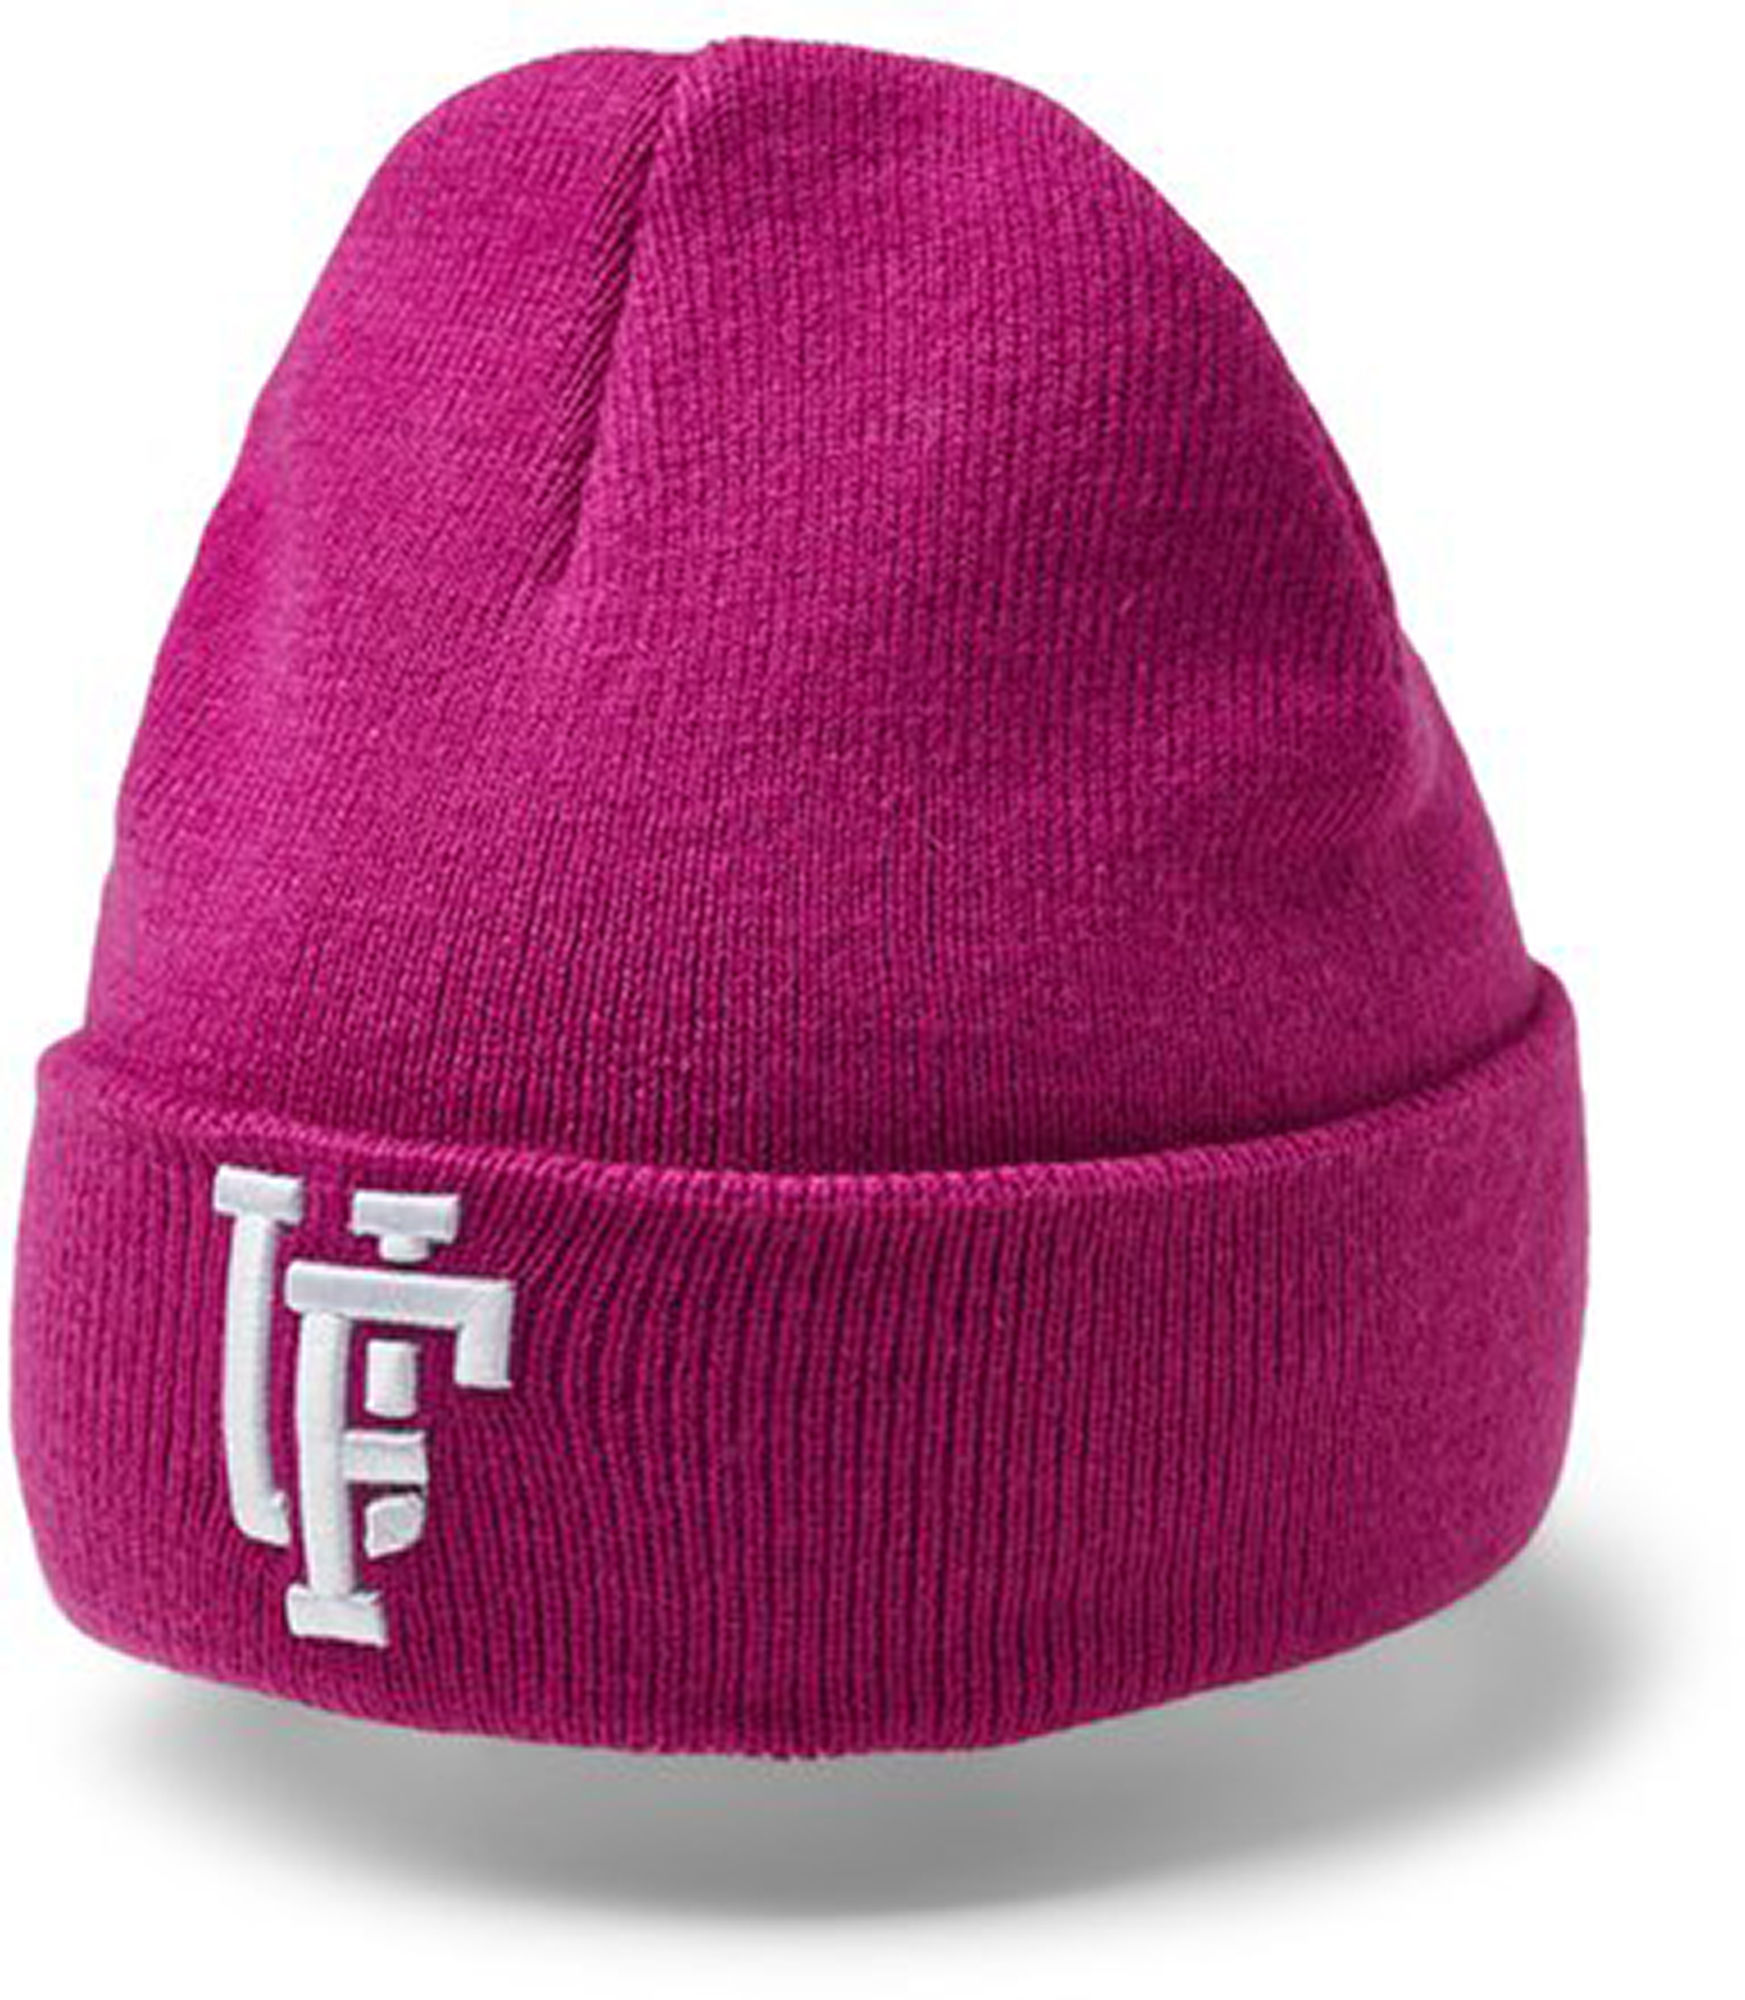 State of WOW Spinback Youth Beanie, Pink - BEST I TEST 2023